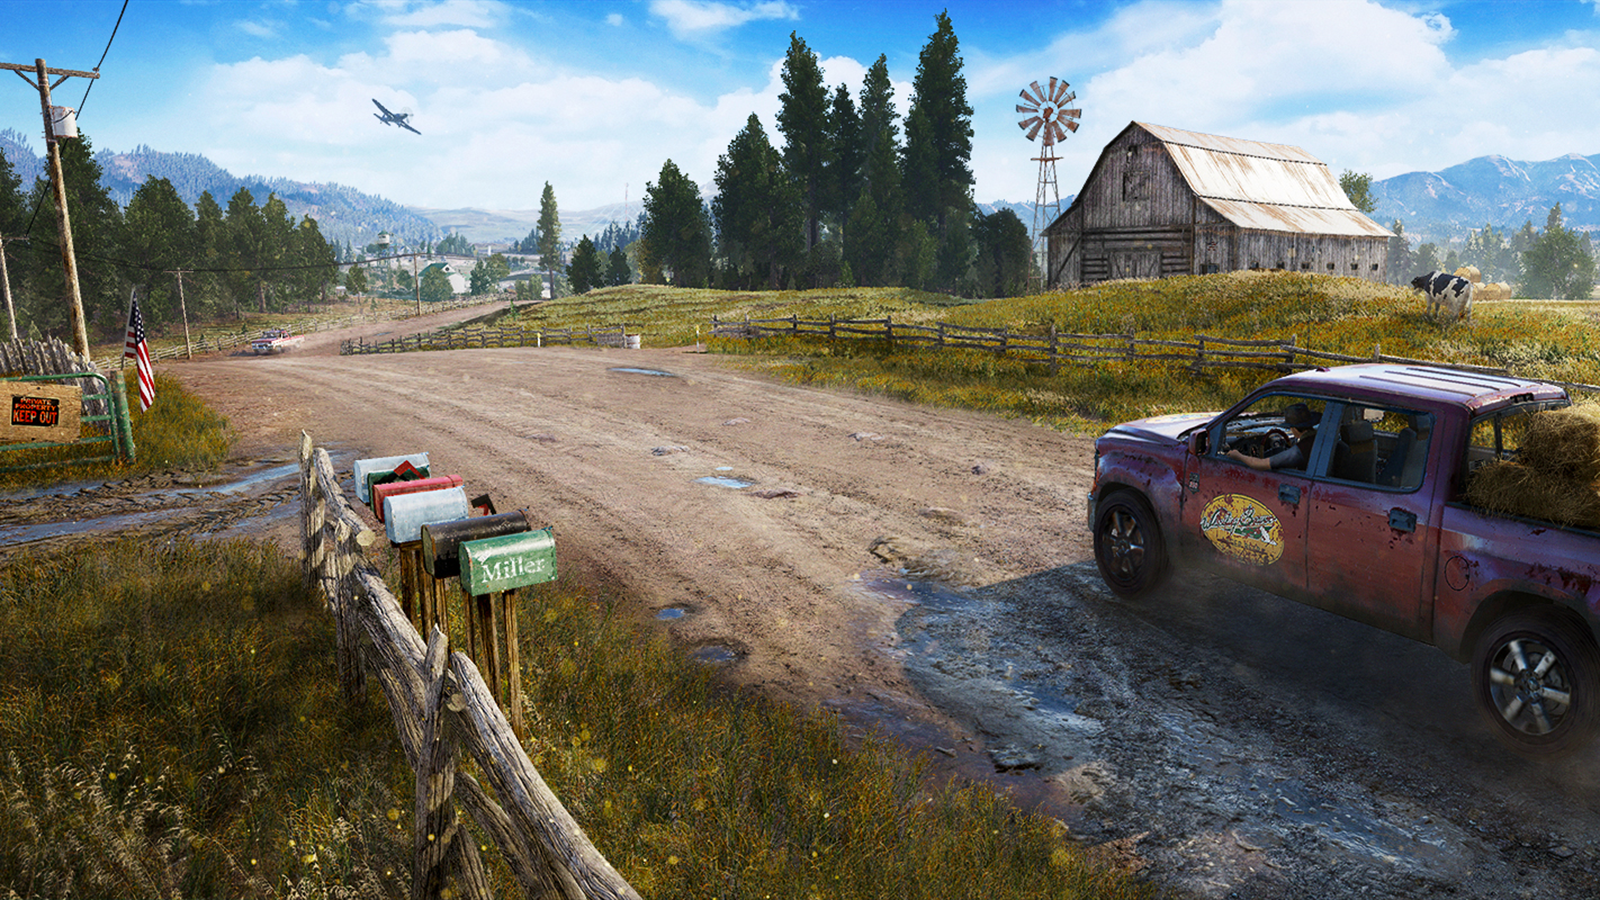 5) Hope County looks absolutely stunning